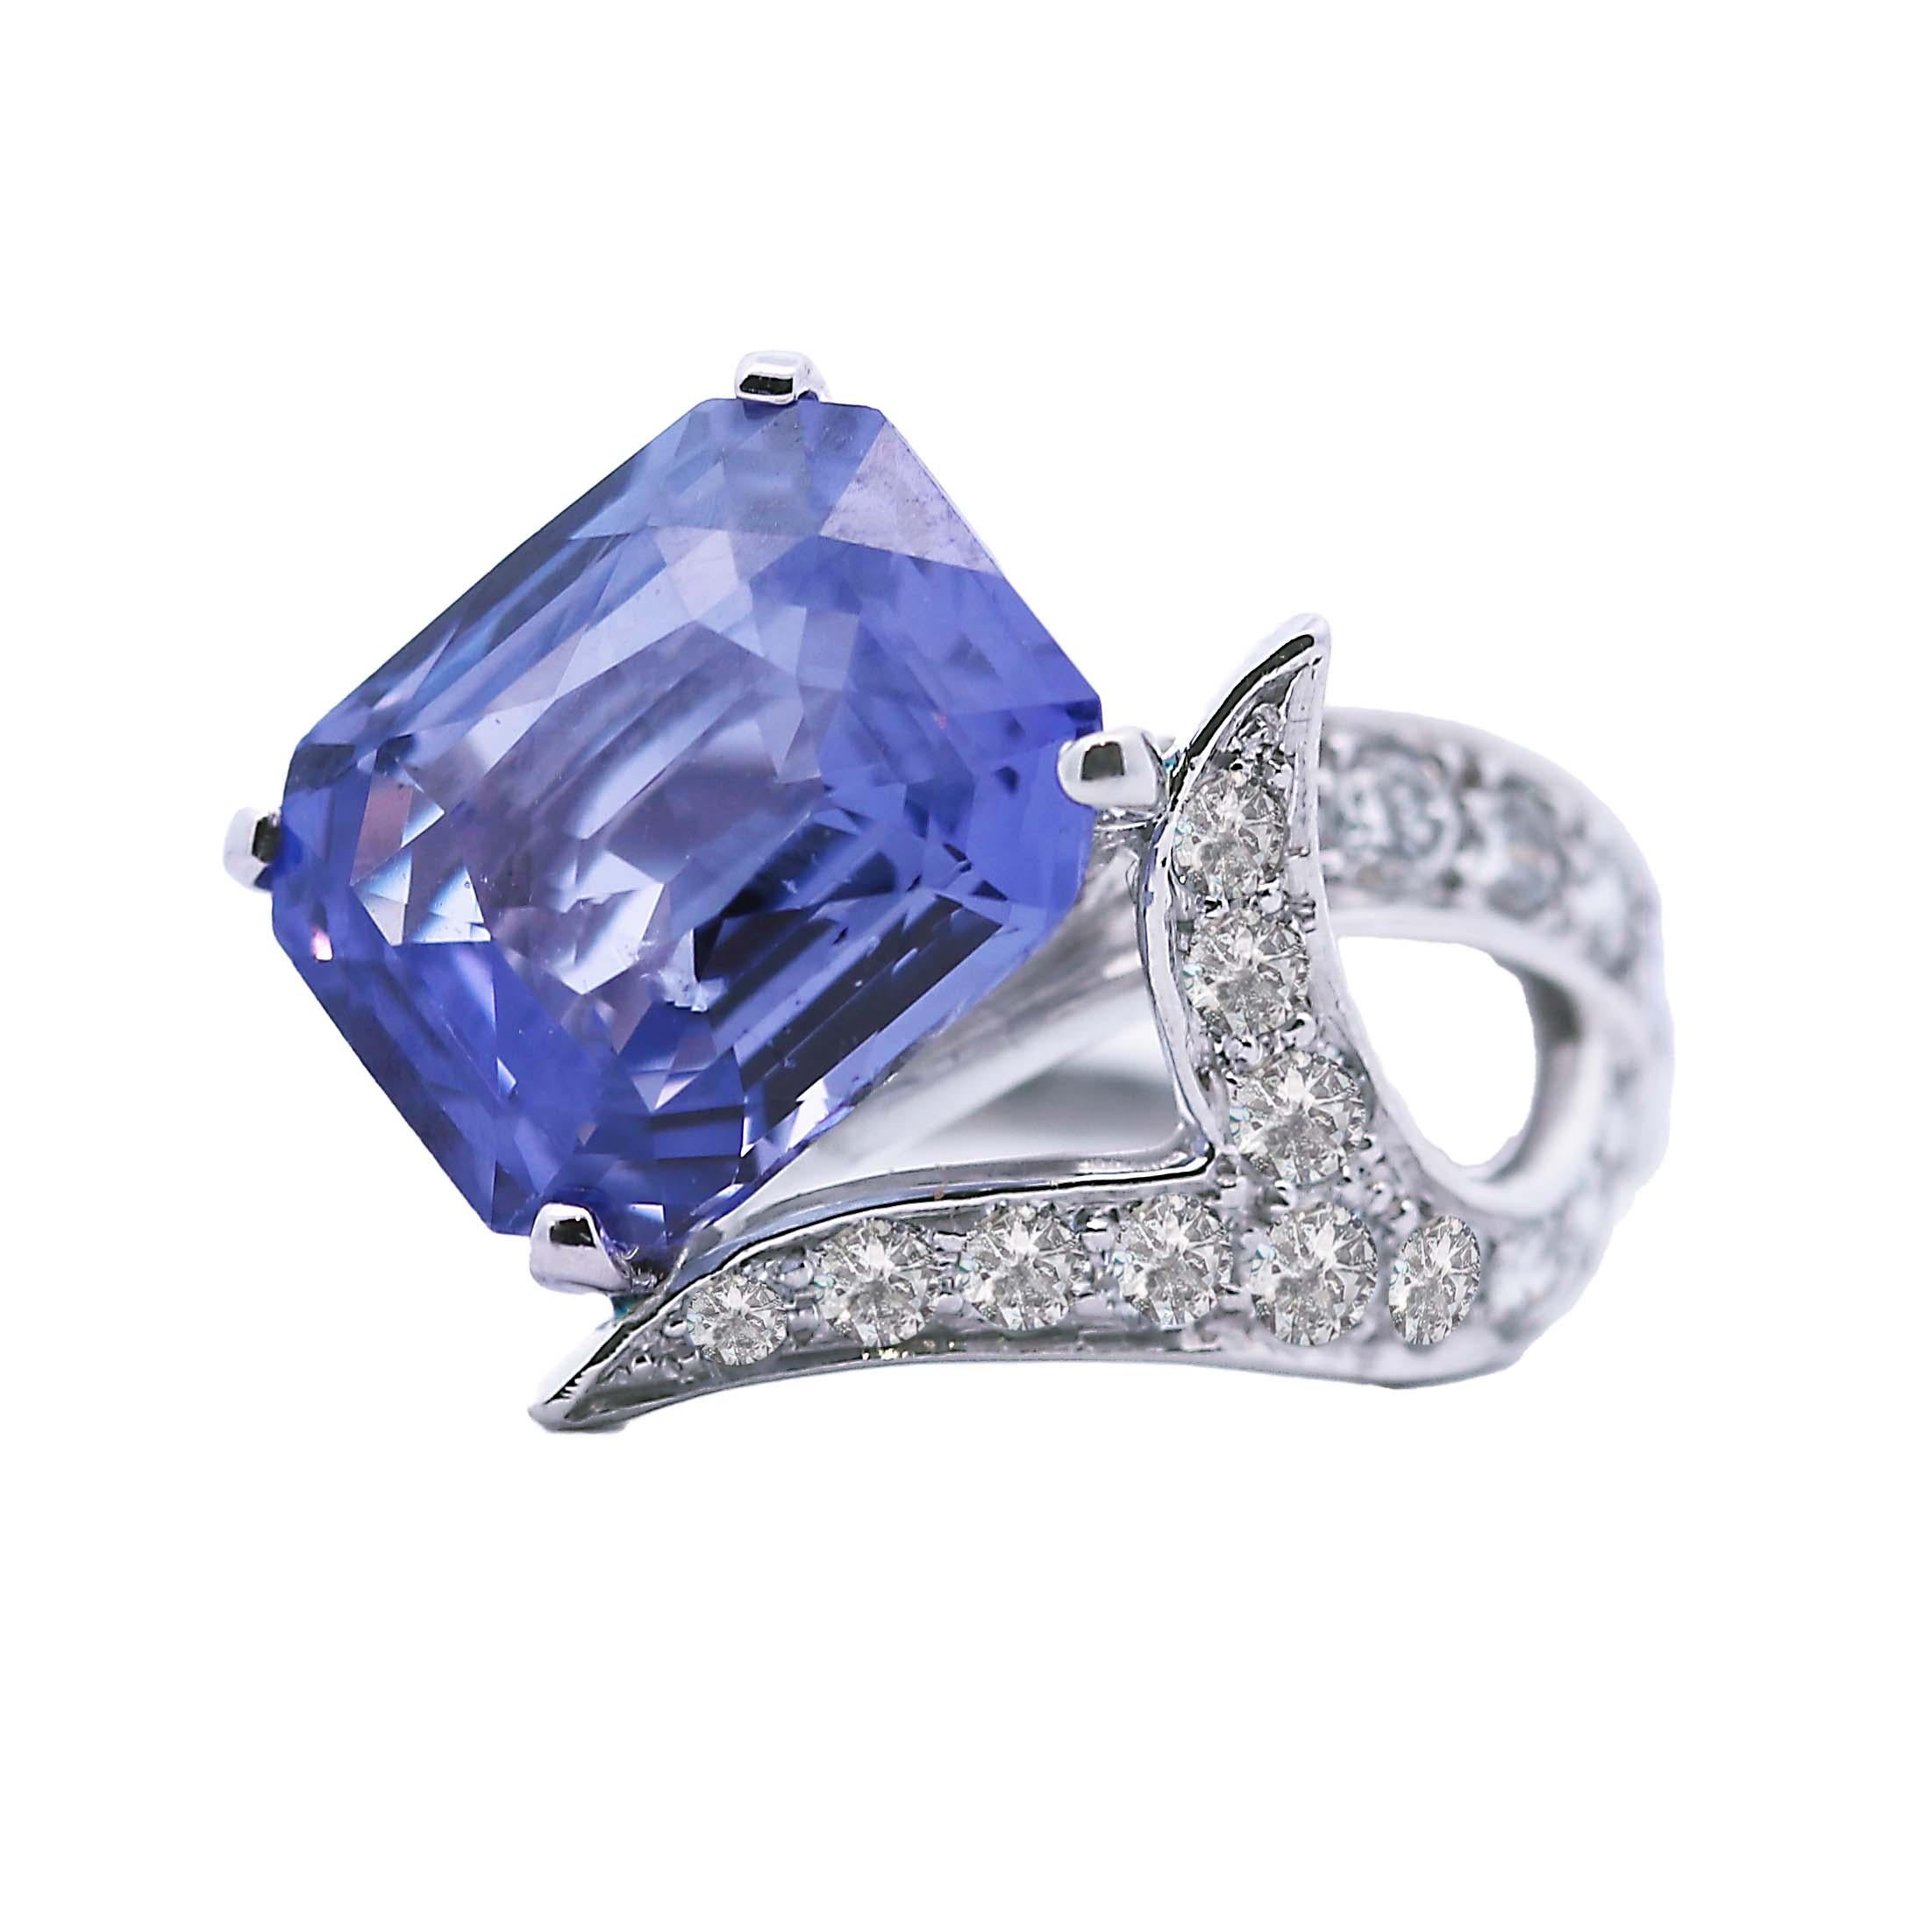 Emerald Cut GIA Certified 6.19 Carat Color Change Sapphire Cocktail Ring For Sale